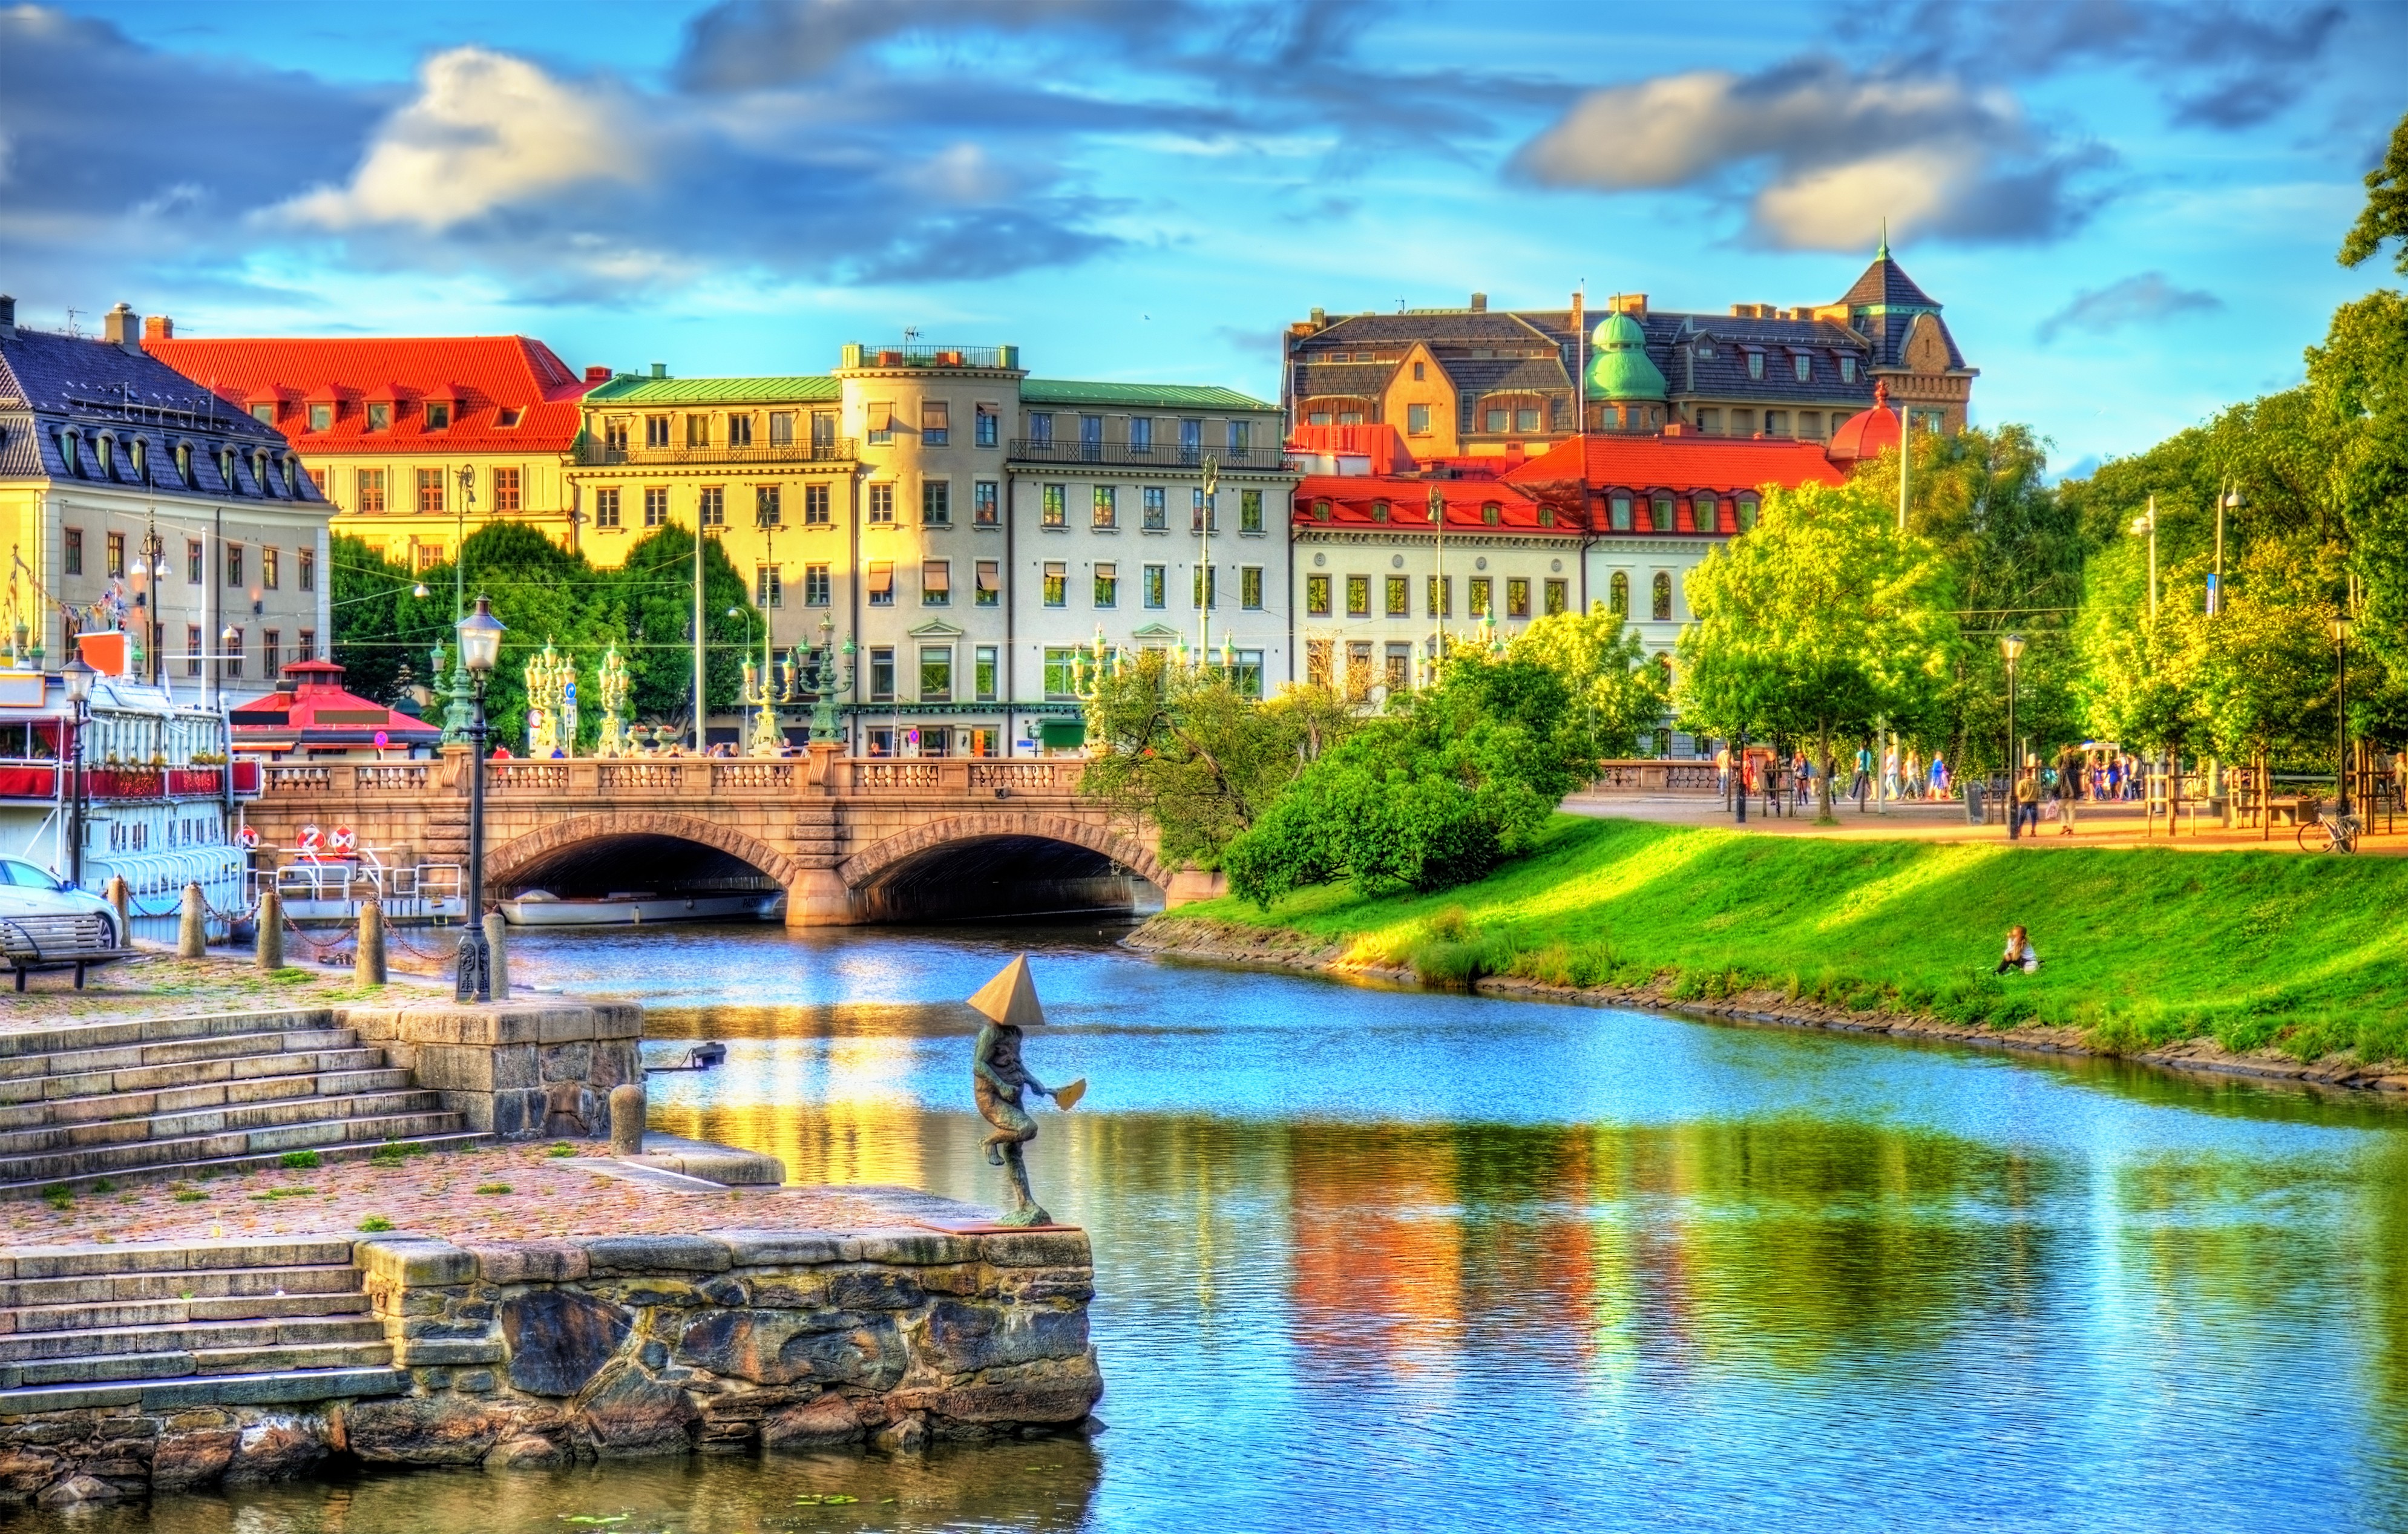 A canal in the historic centre of Gothenburg, Sweden. Photo: Shutterstock